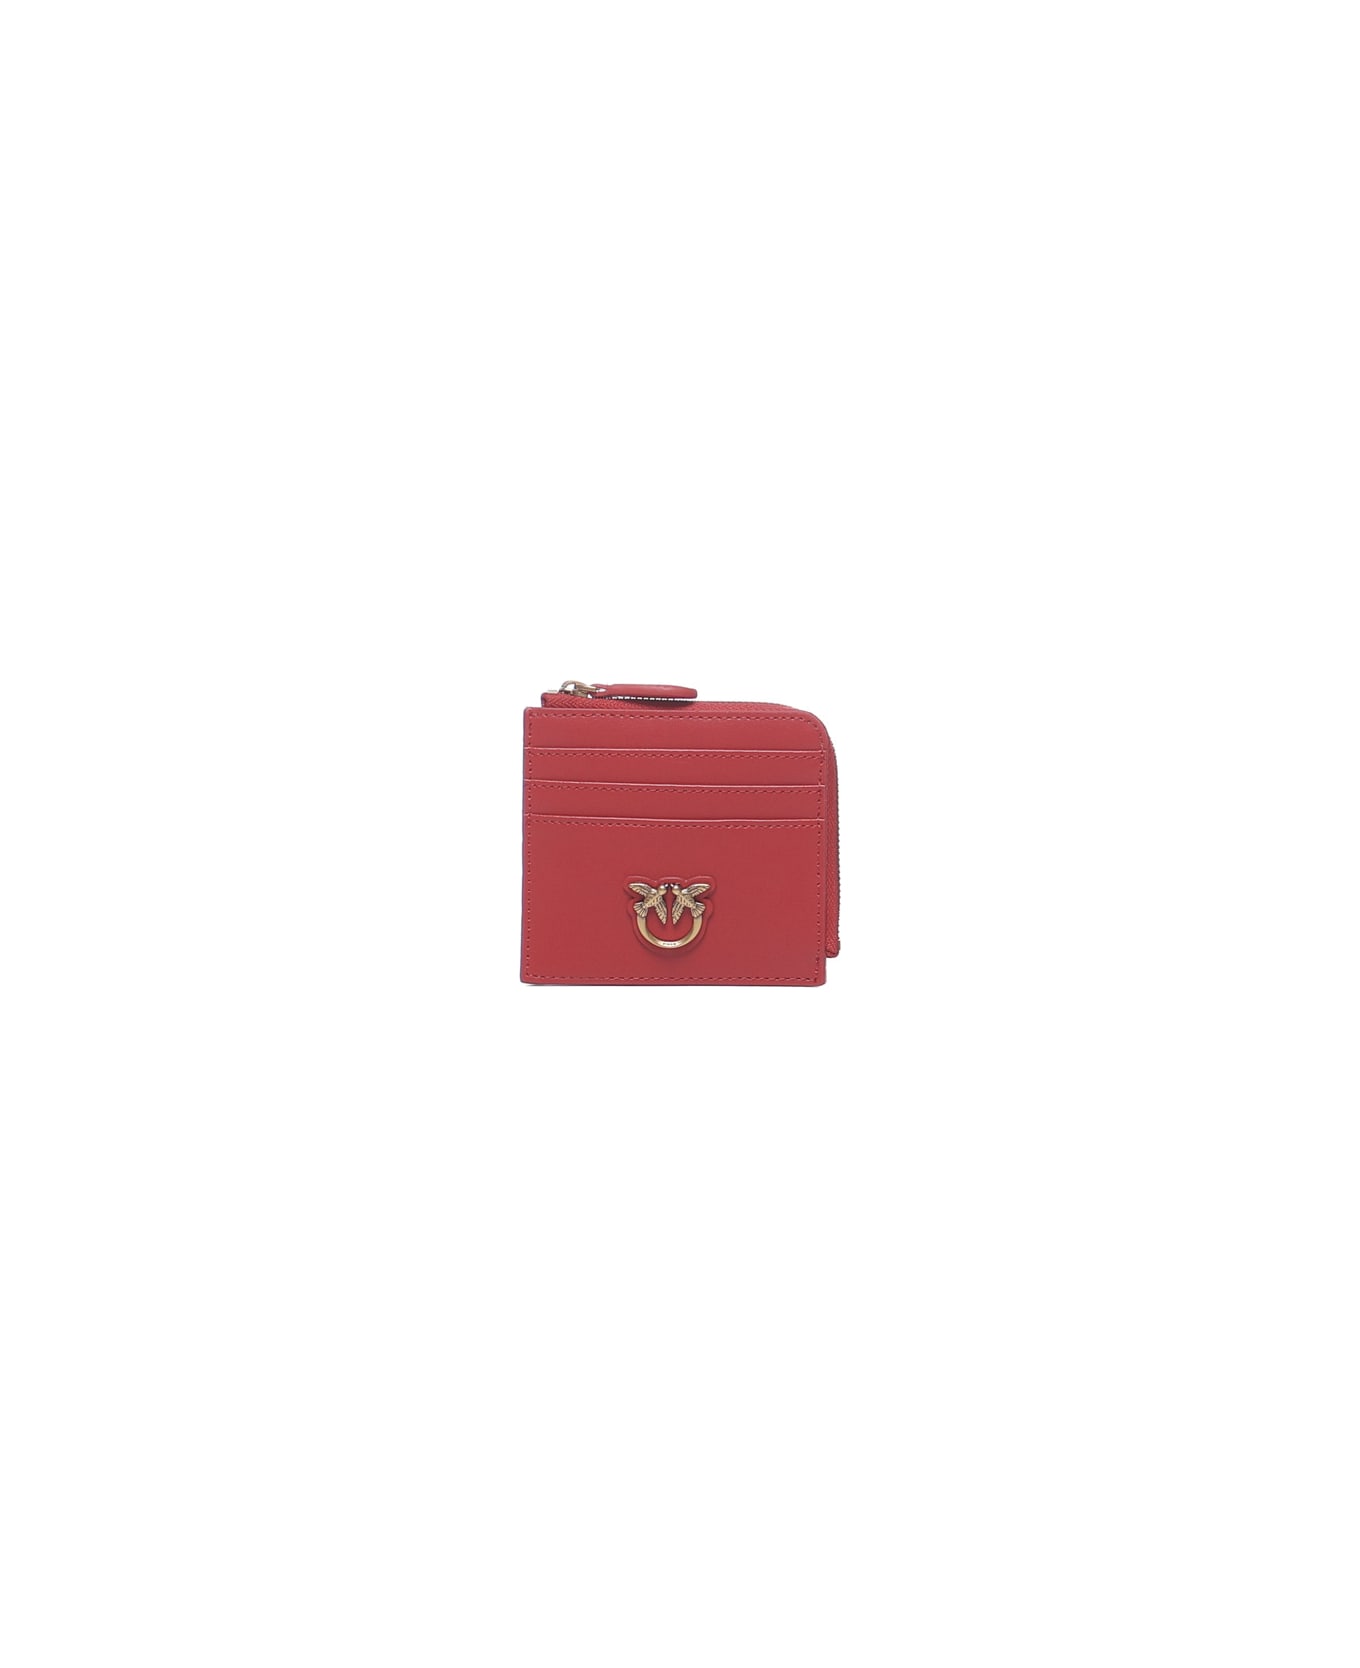 Pinko Wallet With Logo - Red クラッチバッグ